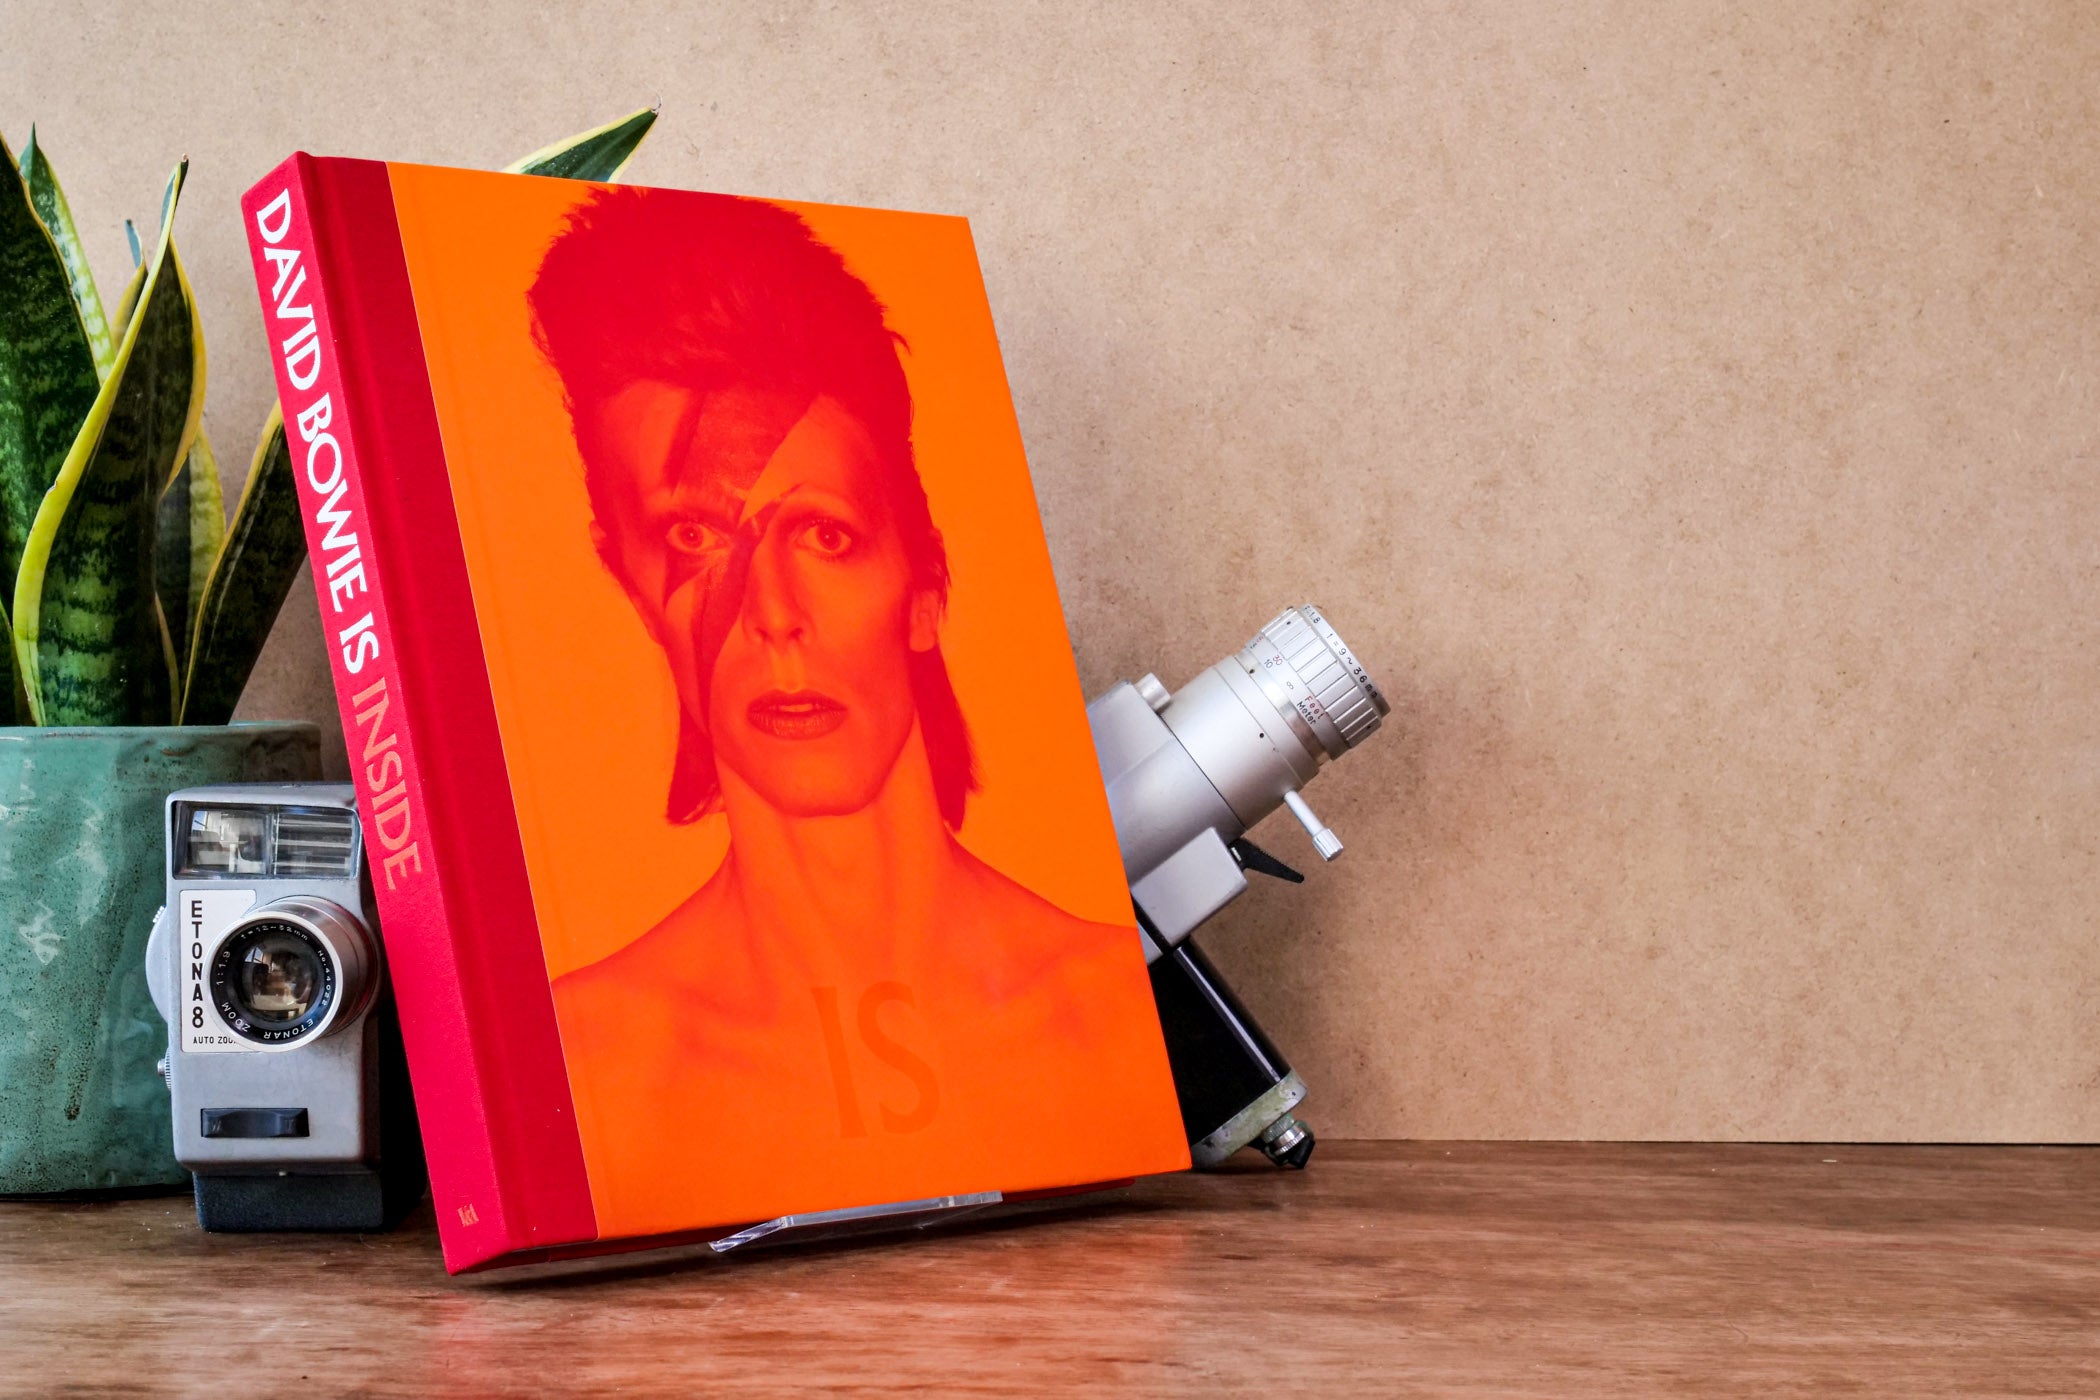 Wooden desk with book 'David Bowie Is' with an orange cover and image of Bowie.